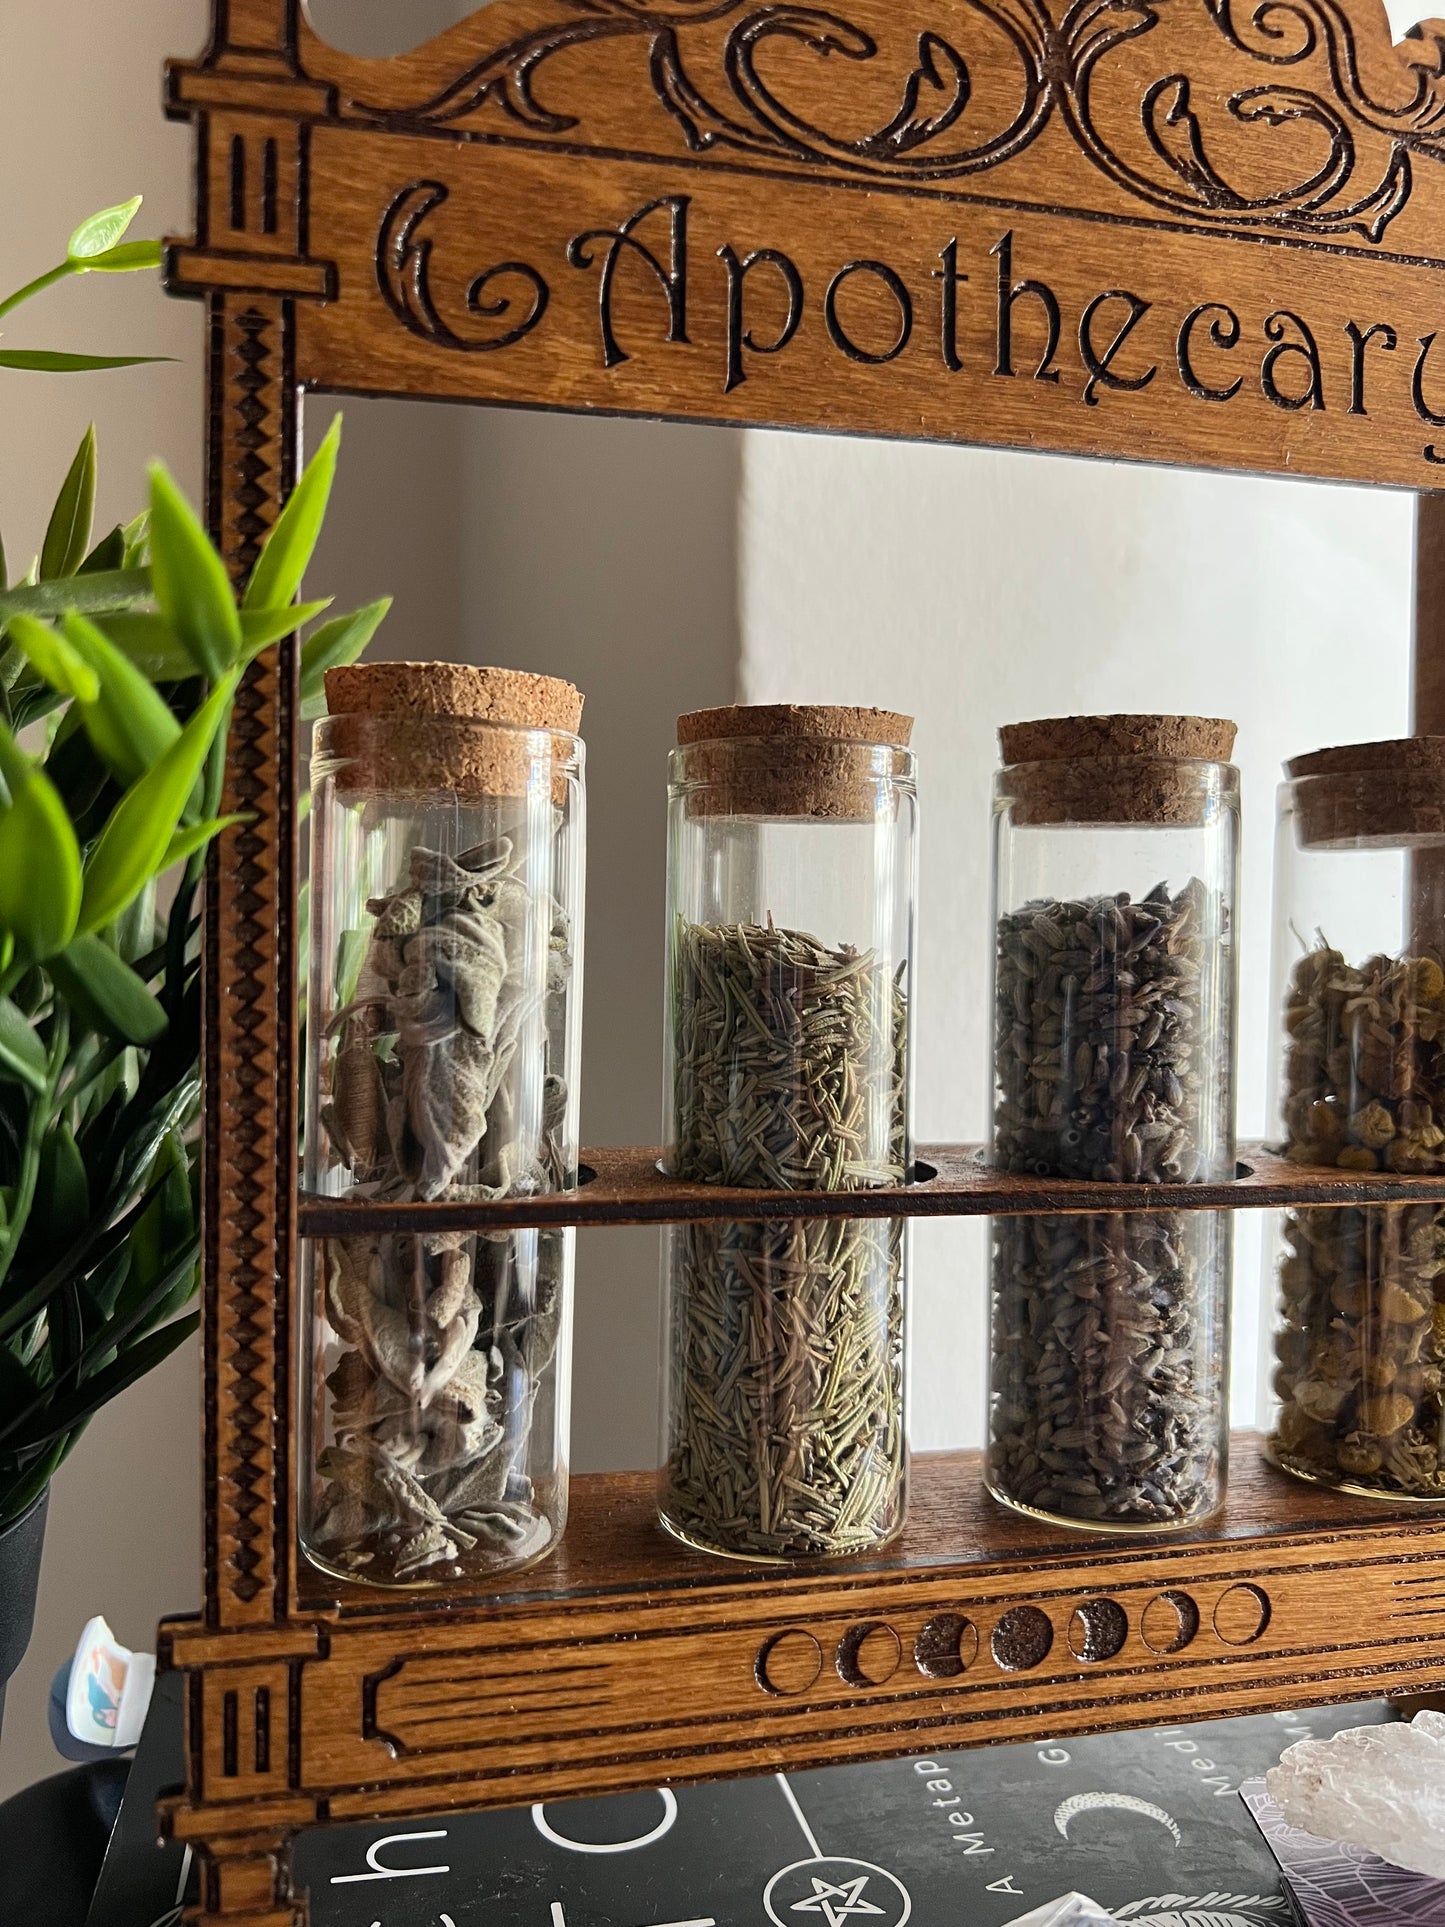 Apothecary stand for herbs or potions